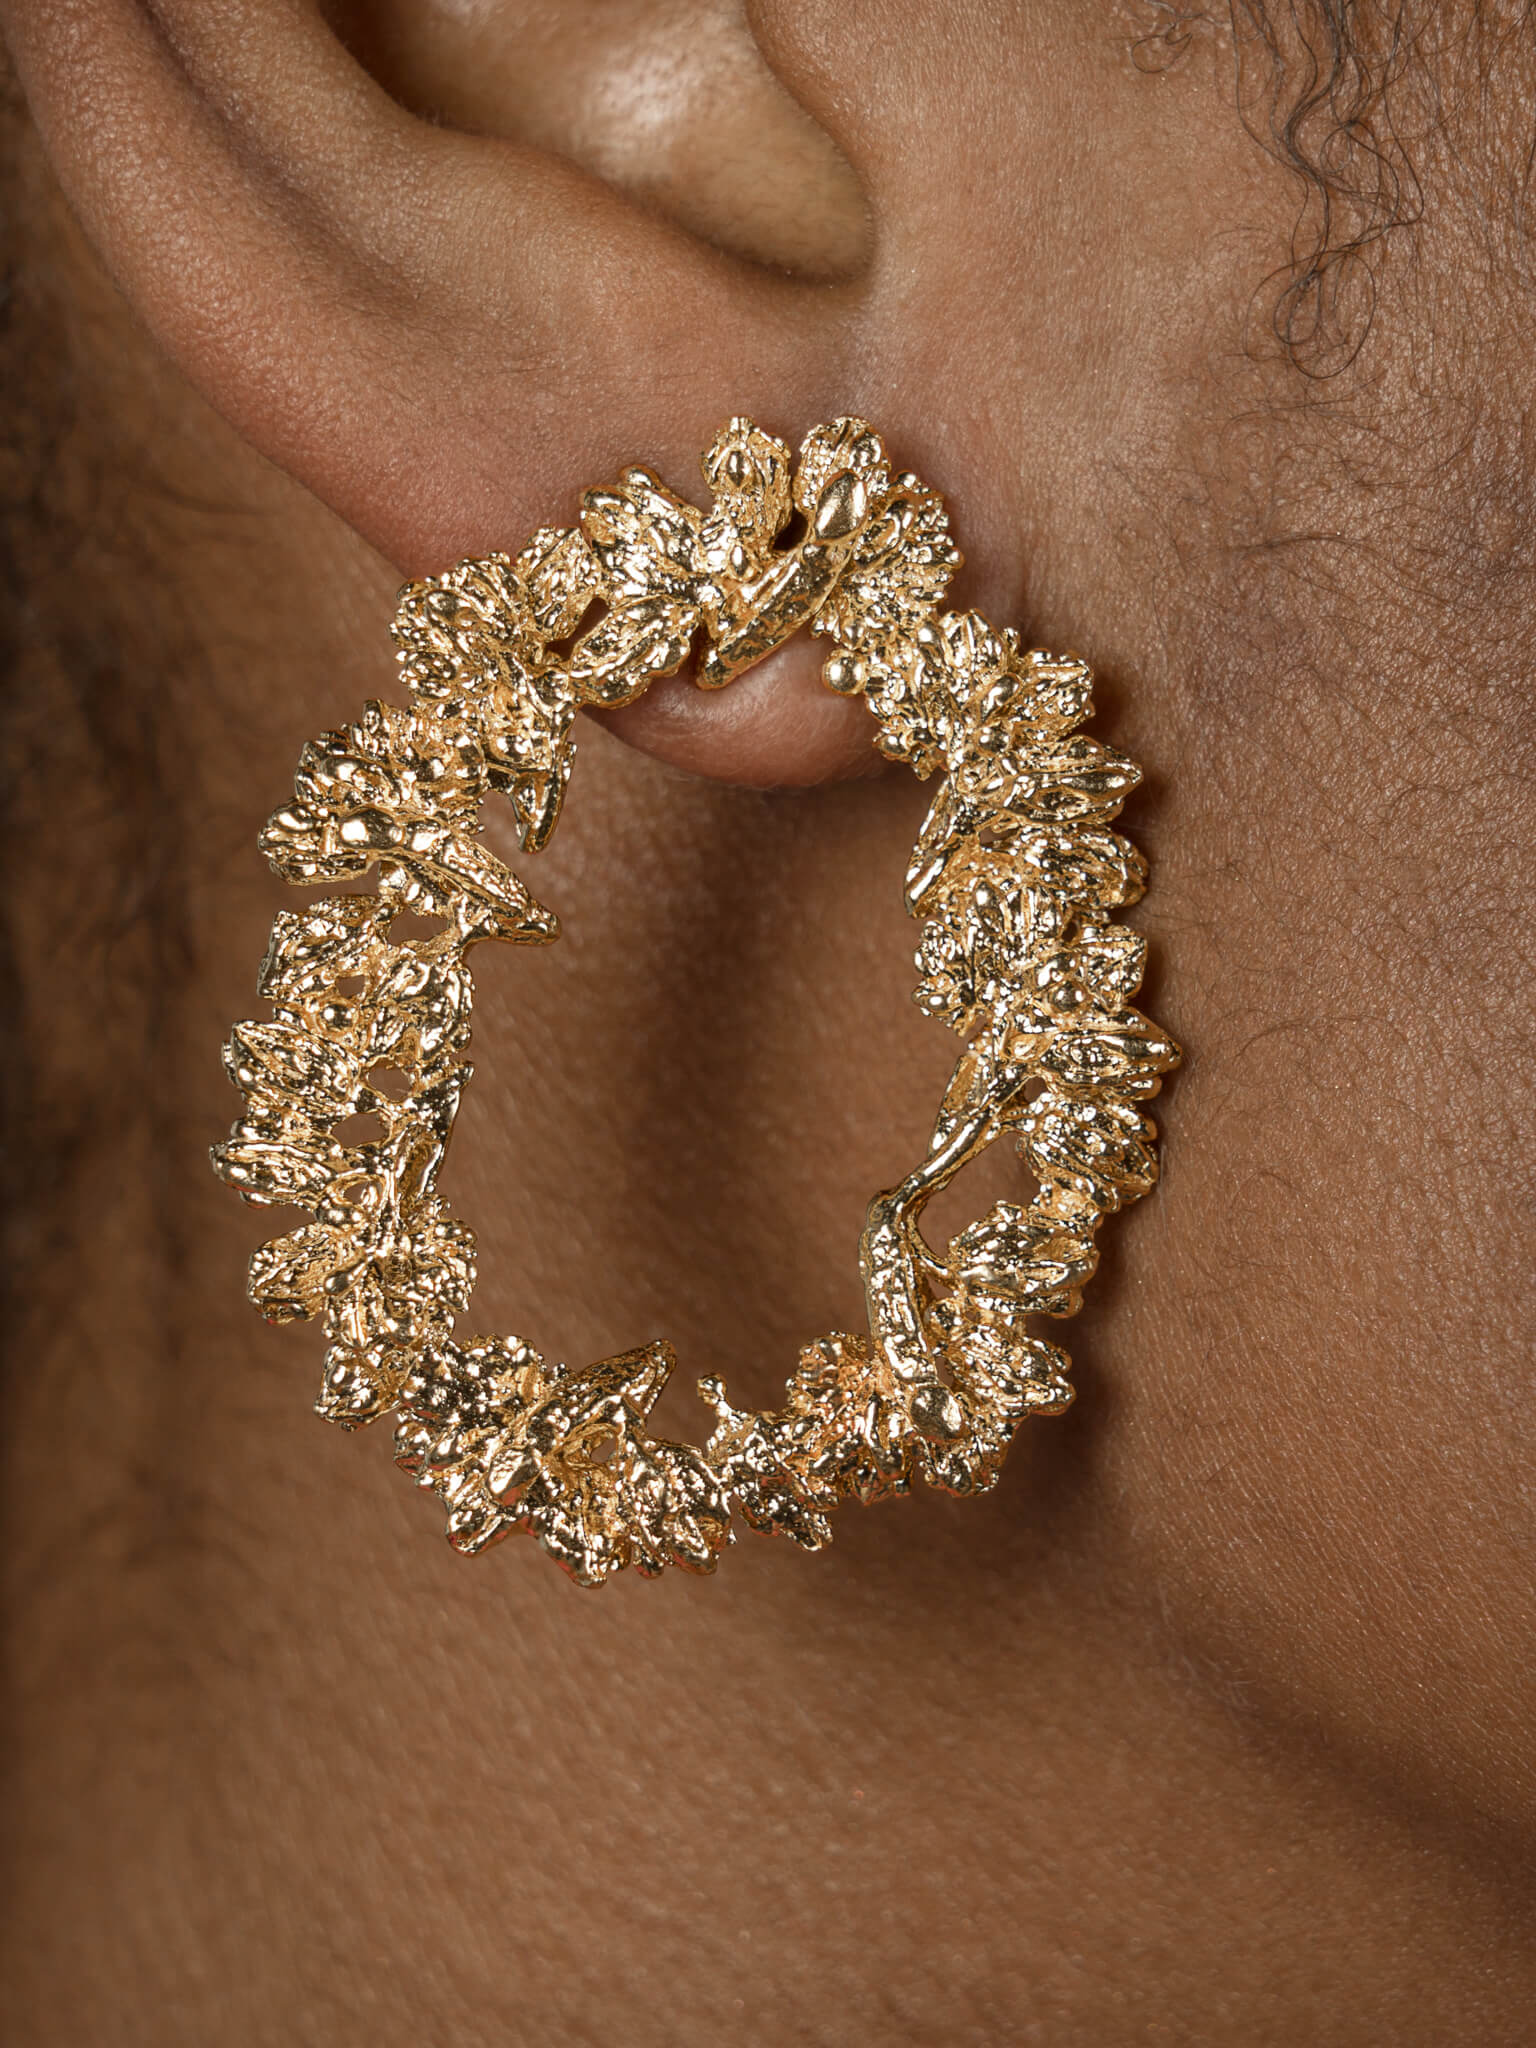 A woman's ear adorned with a Cremilde Bispo Jewellery Garden's Delight statement earrings, in gold plated sterling silver, with hand-sculpted nature inspired embellishments.